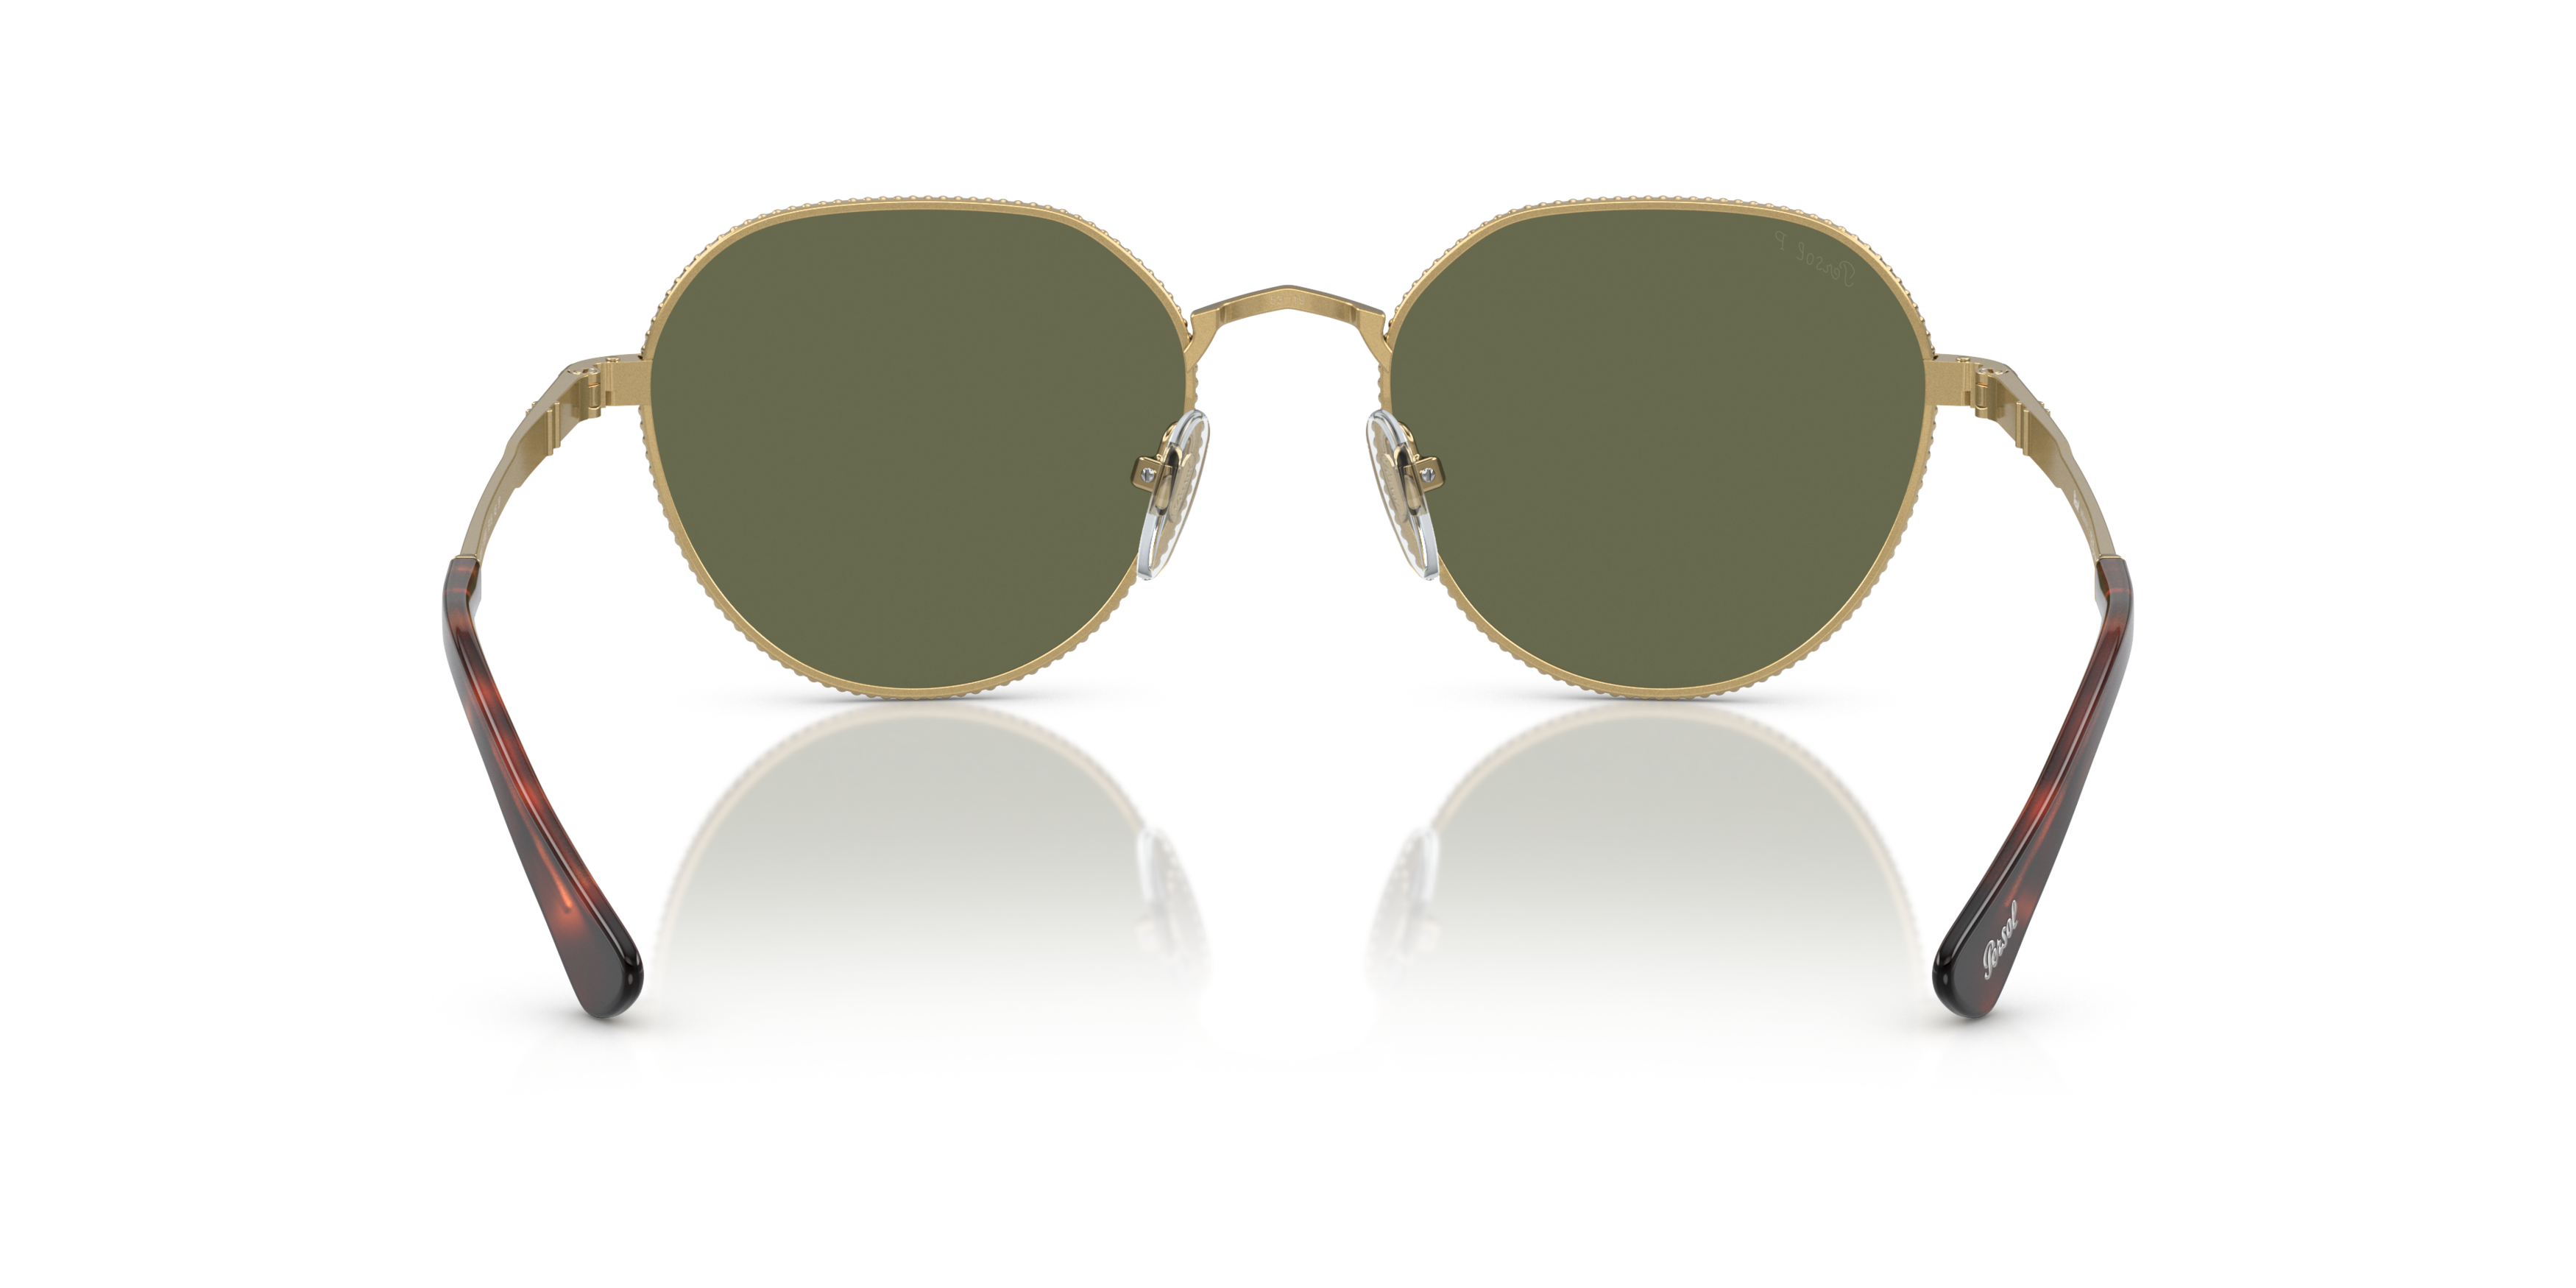 [products.image.detail02] Persol 0PO2486S 110958